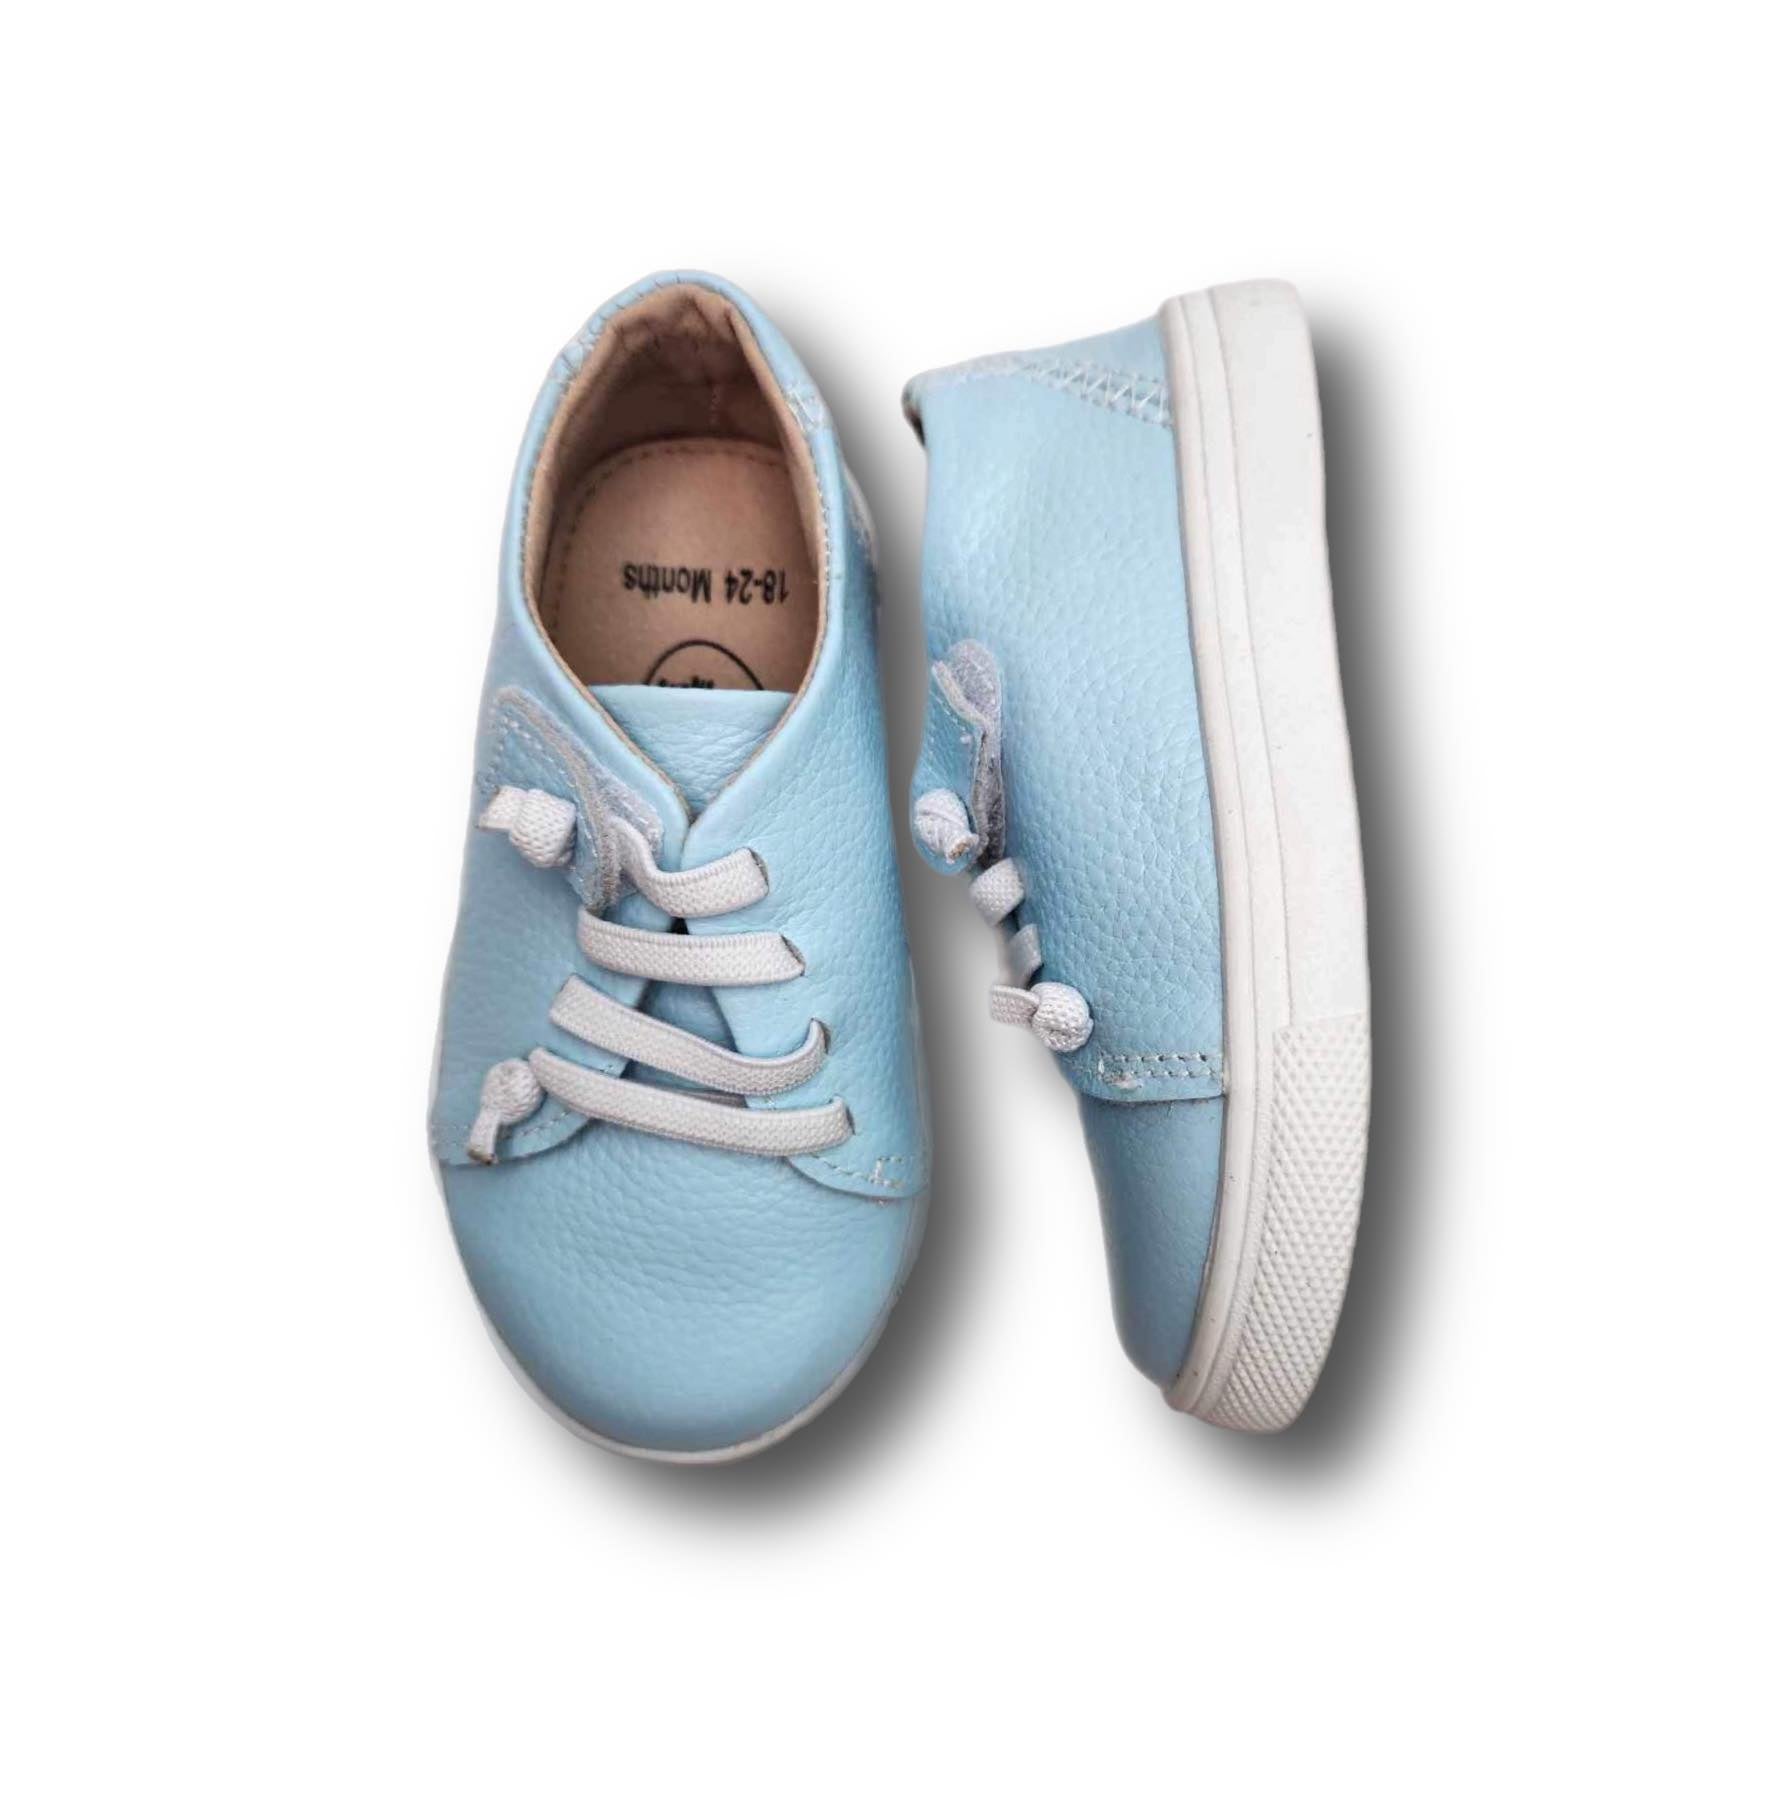 ZACKERY Children's Low-Top in Light Blue Leather